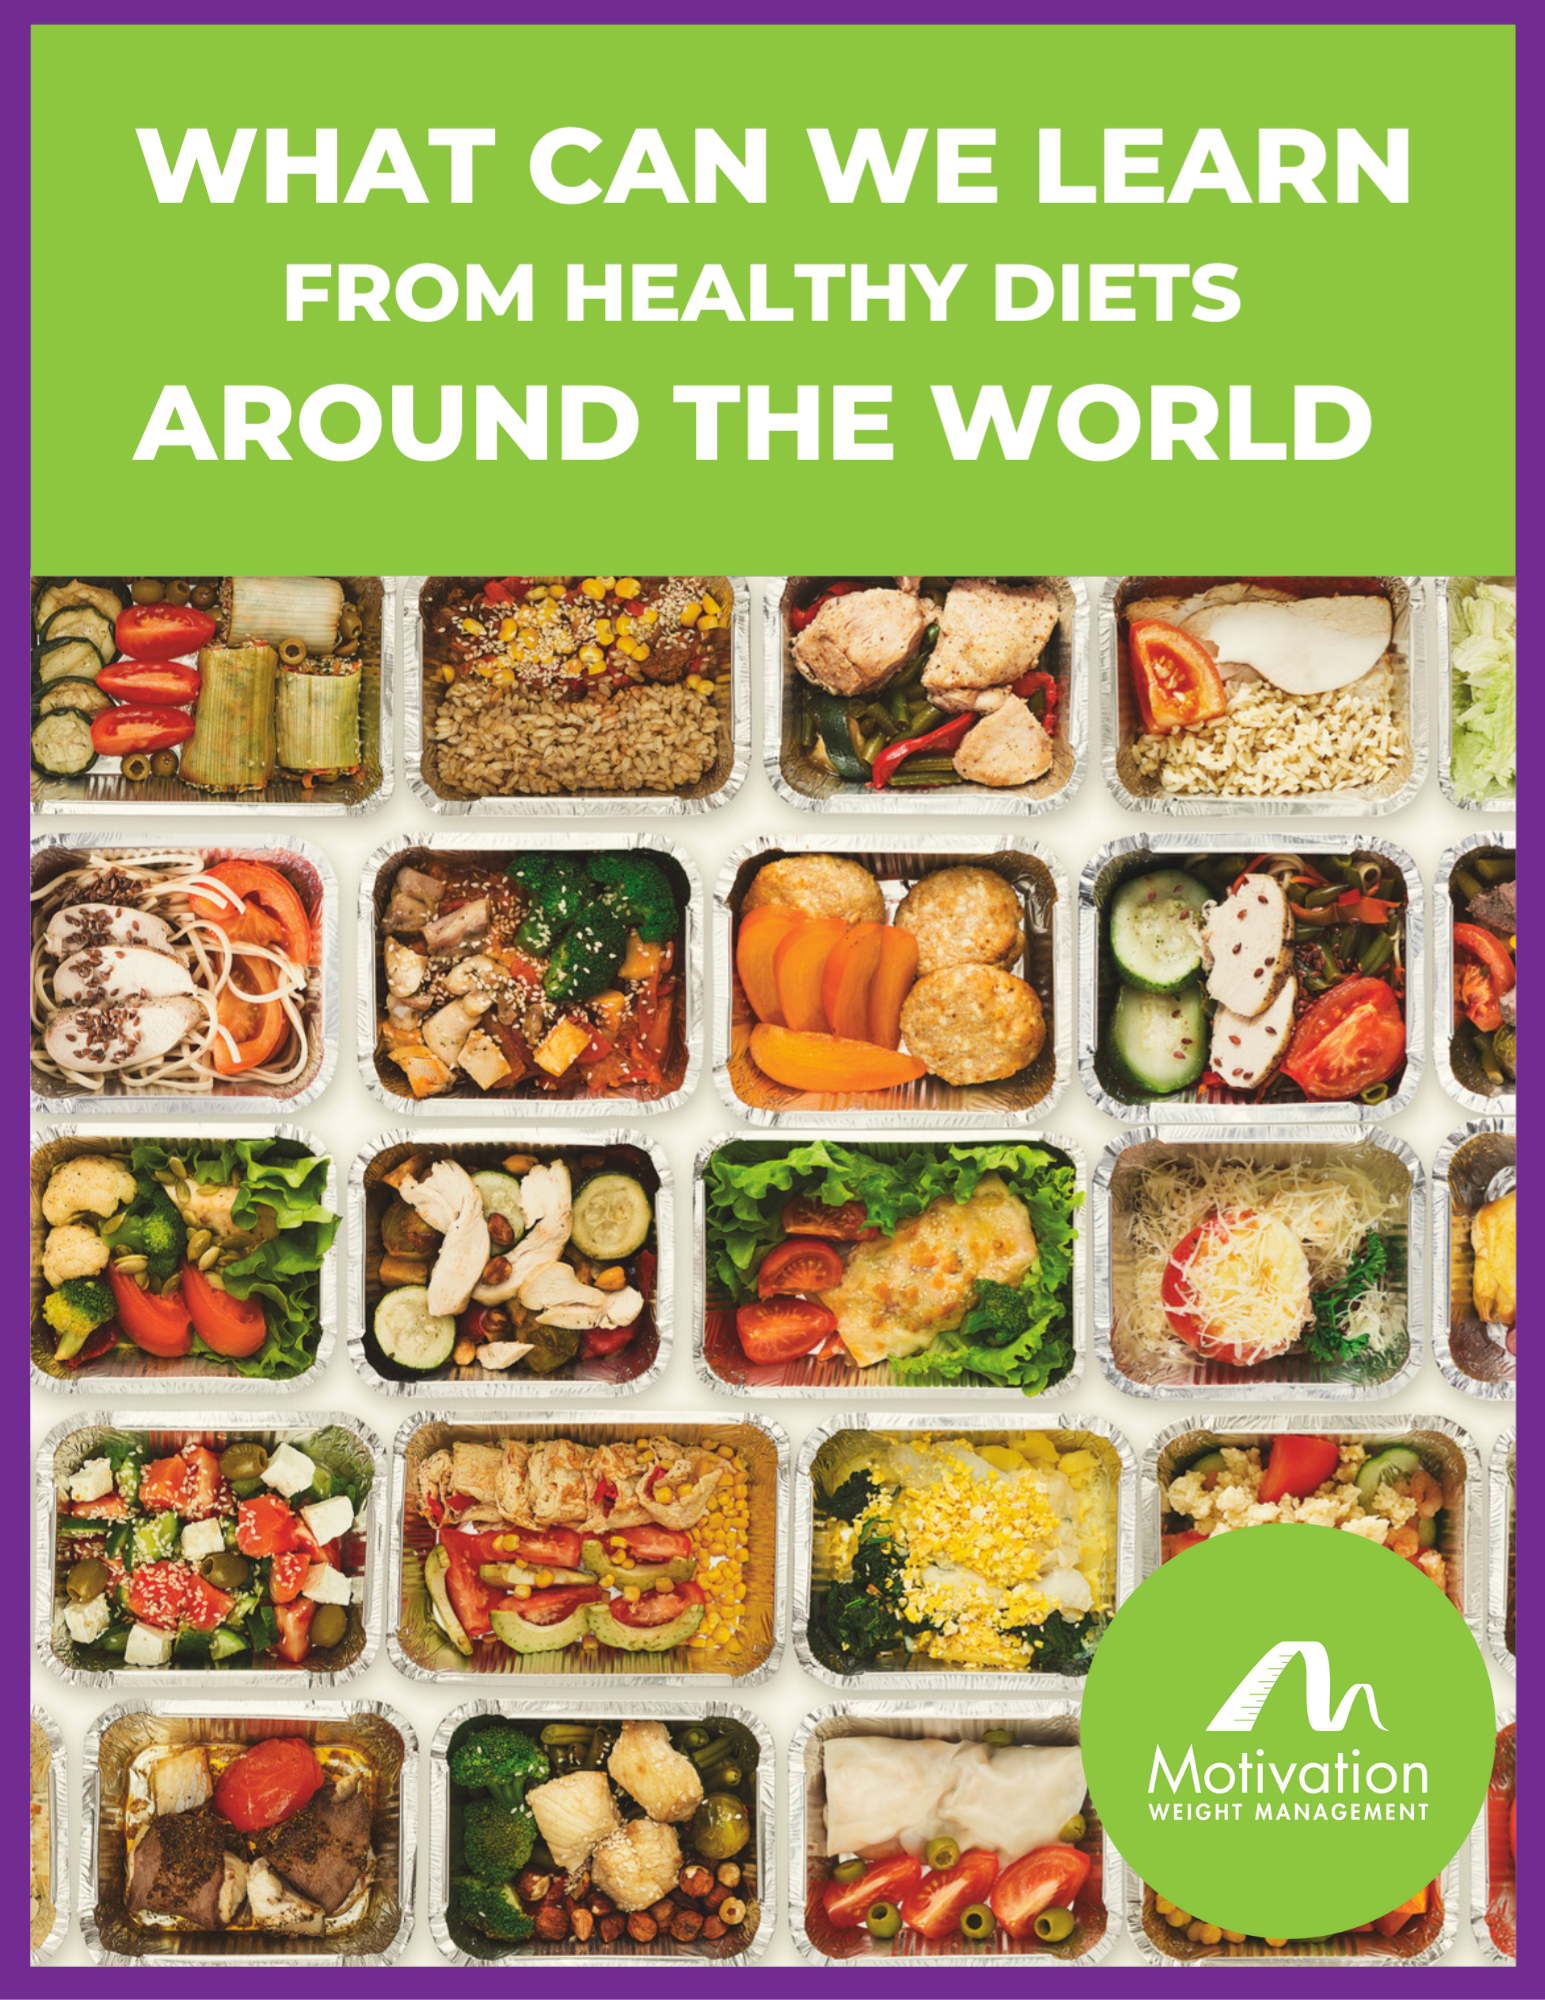 What can we learn from healthy diets around the world